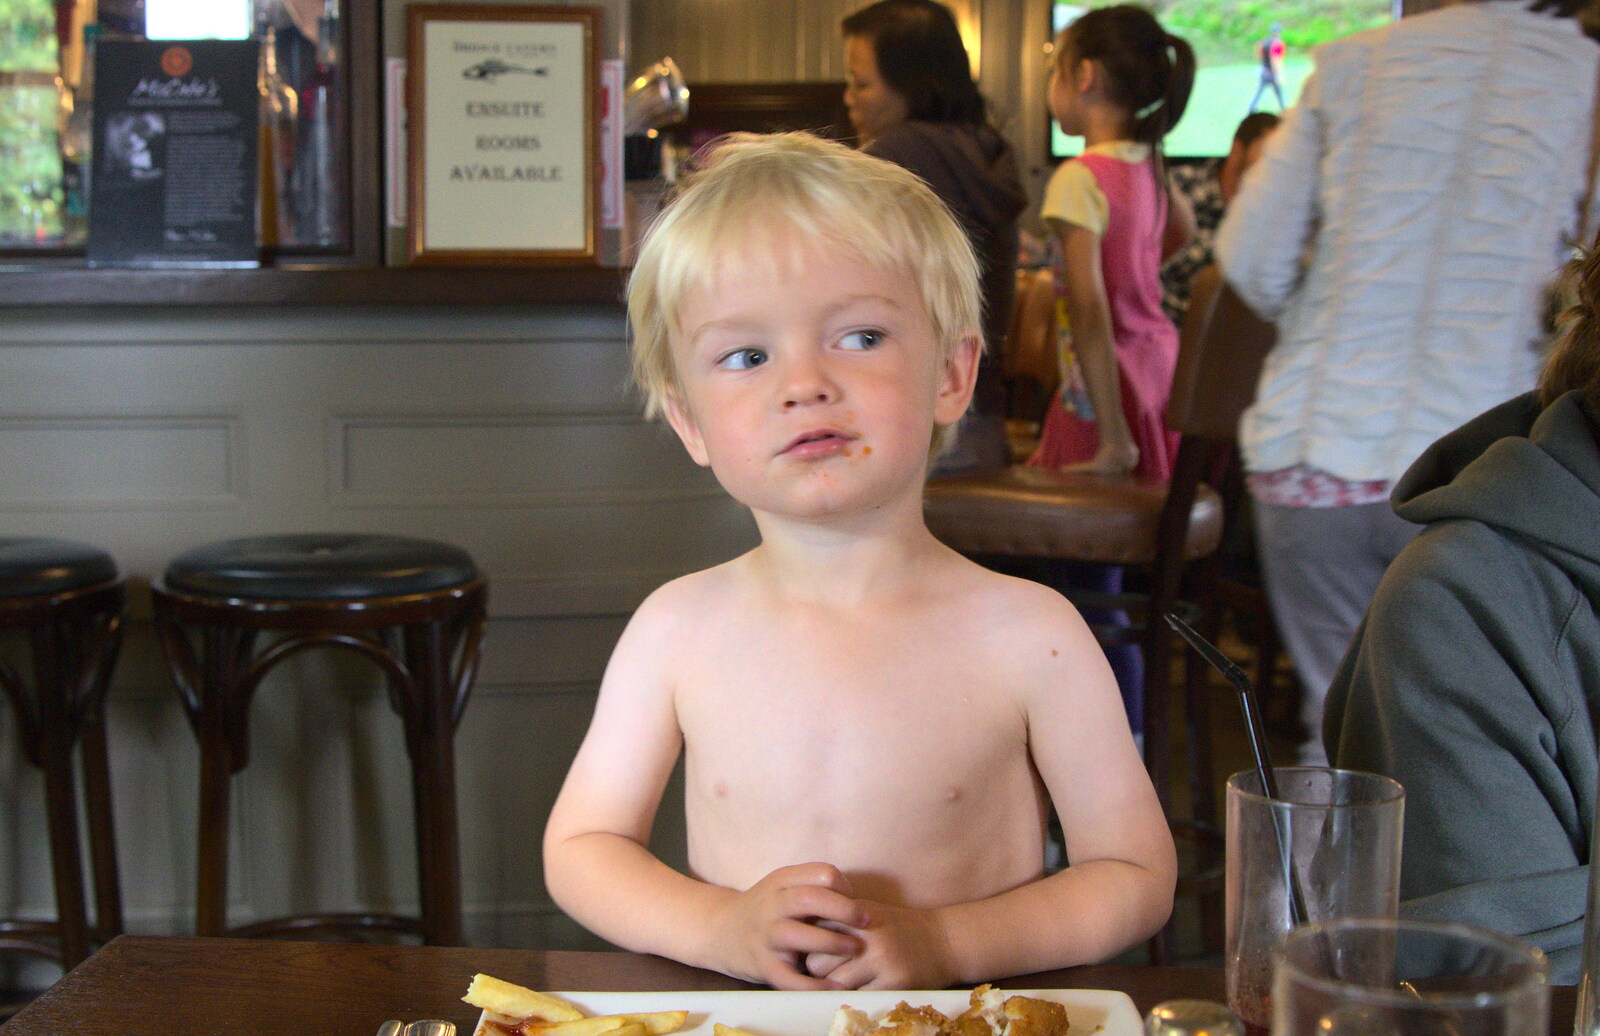 Harry eats lunch with his shirt off from Camping at Silver Strand, Wicklow, County Wicklow, Ireland - 7th August 2014